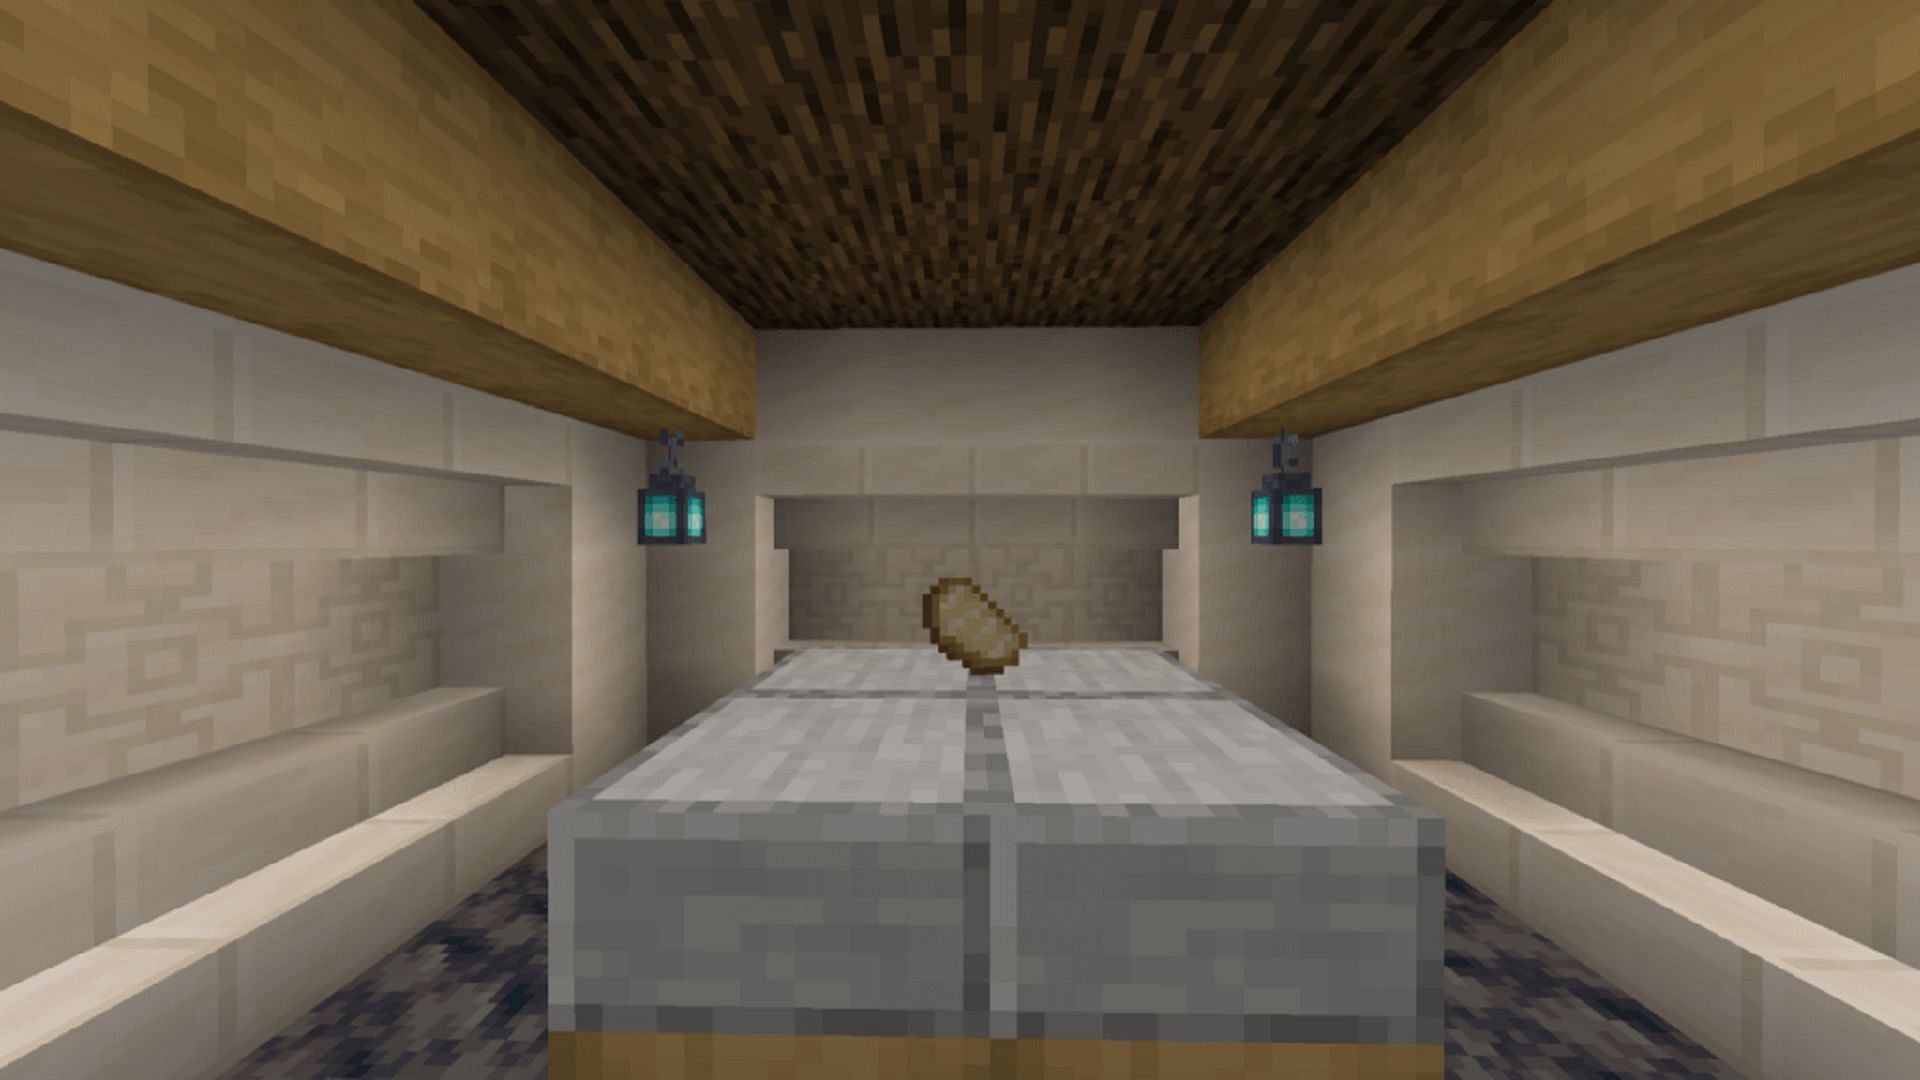 A cooked porkchop in Minecraft (Image via Mojang)